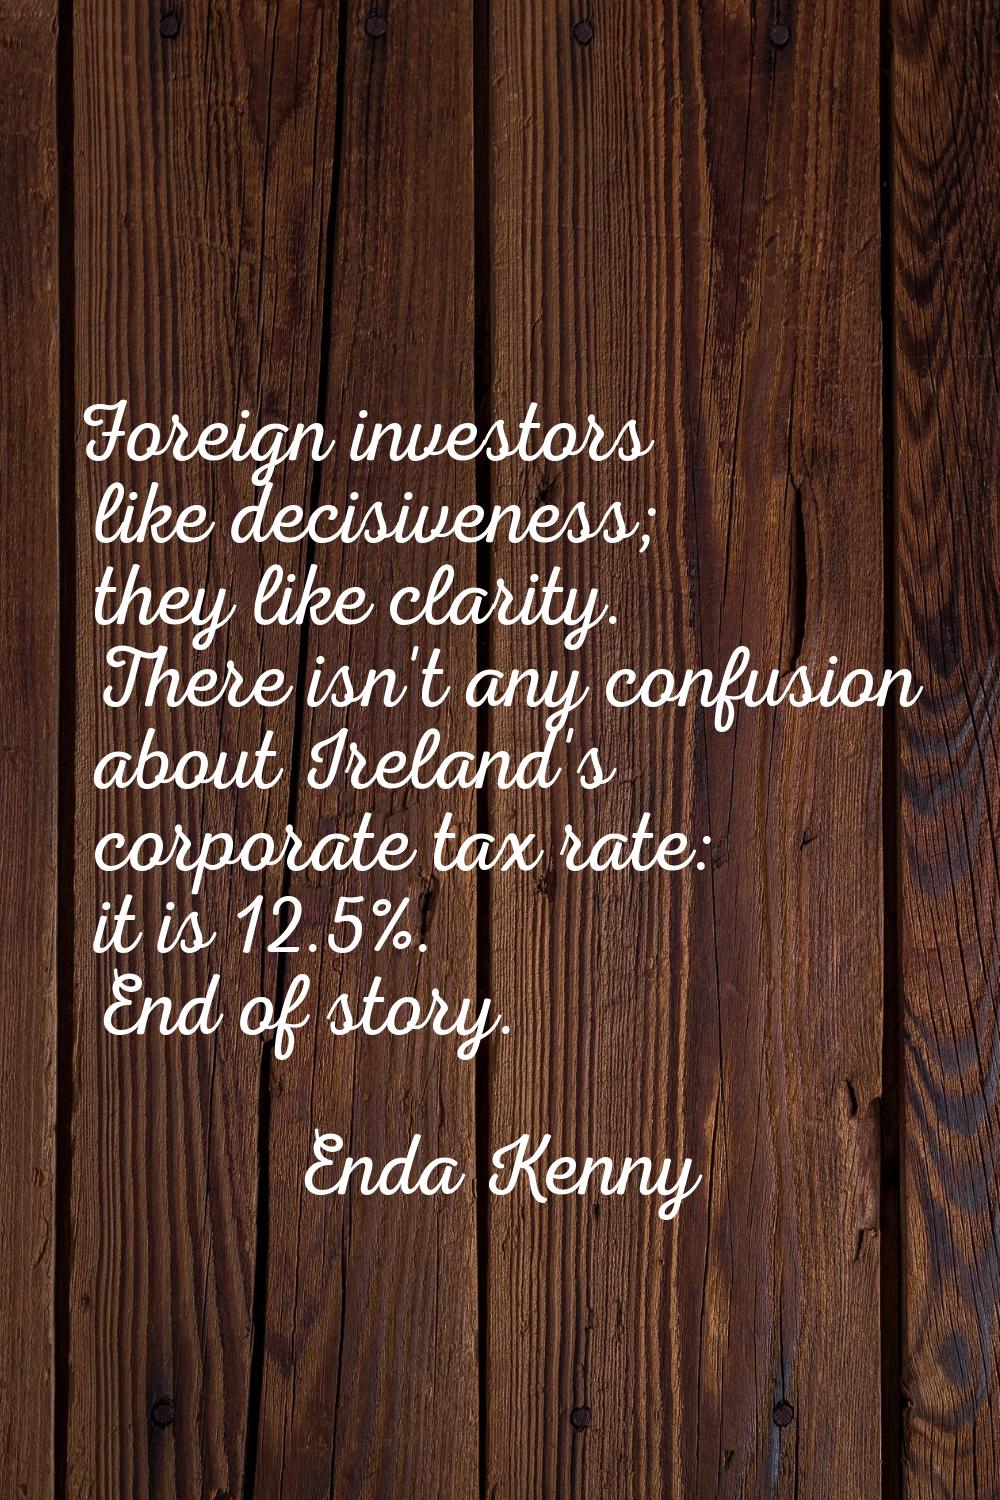 Foreign investors like decisiveness; they like clarity. There isn't any confusion about Ireland's c